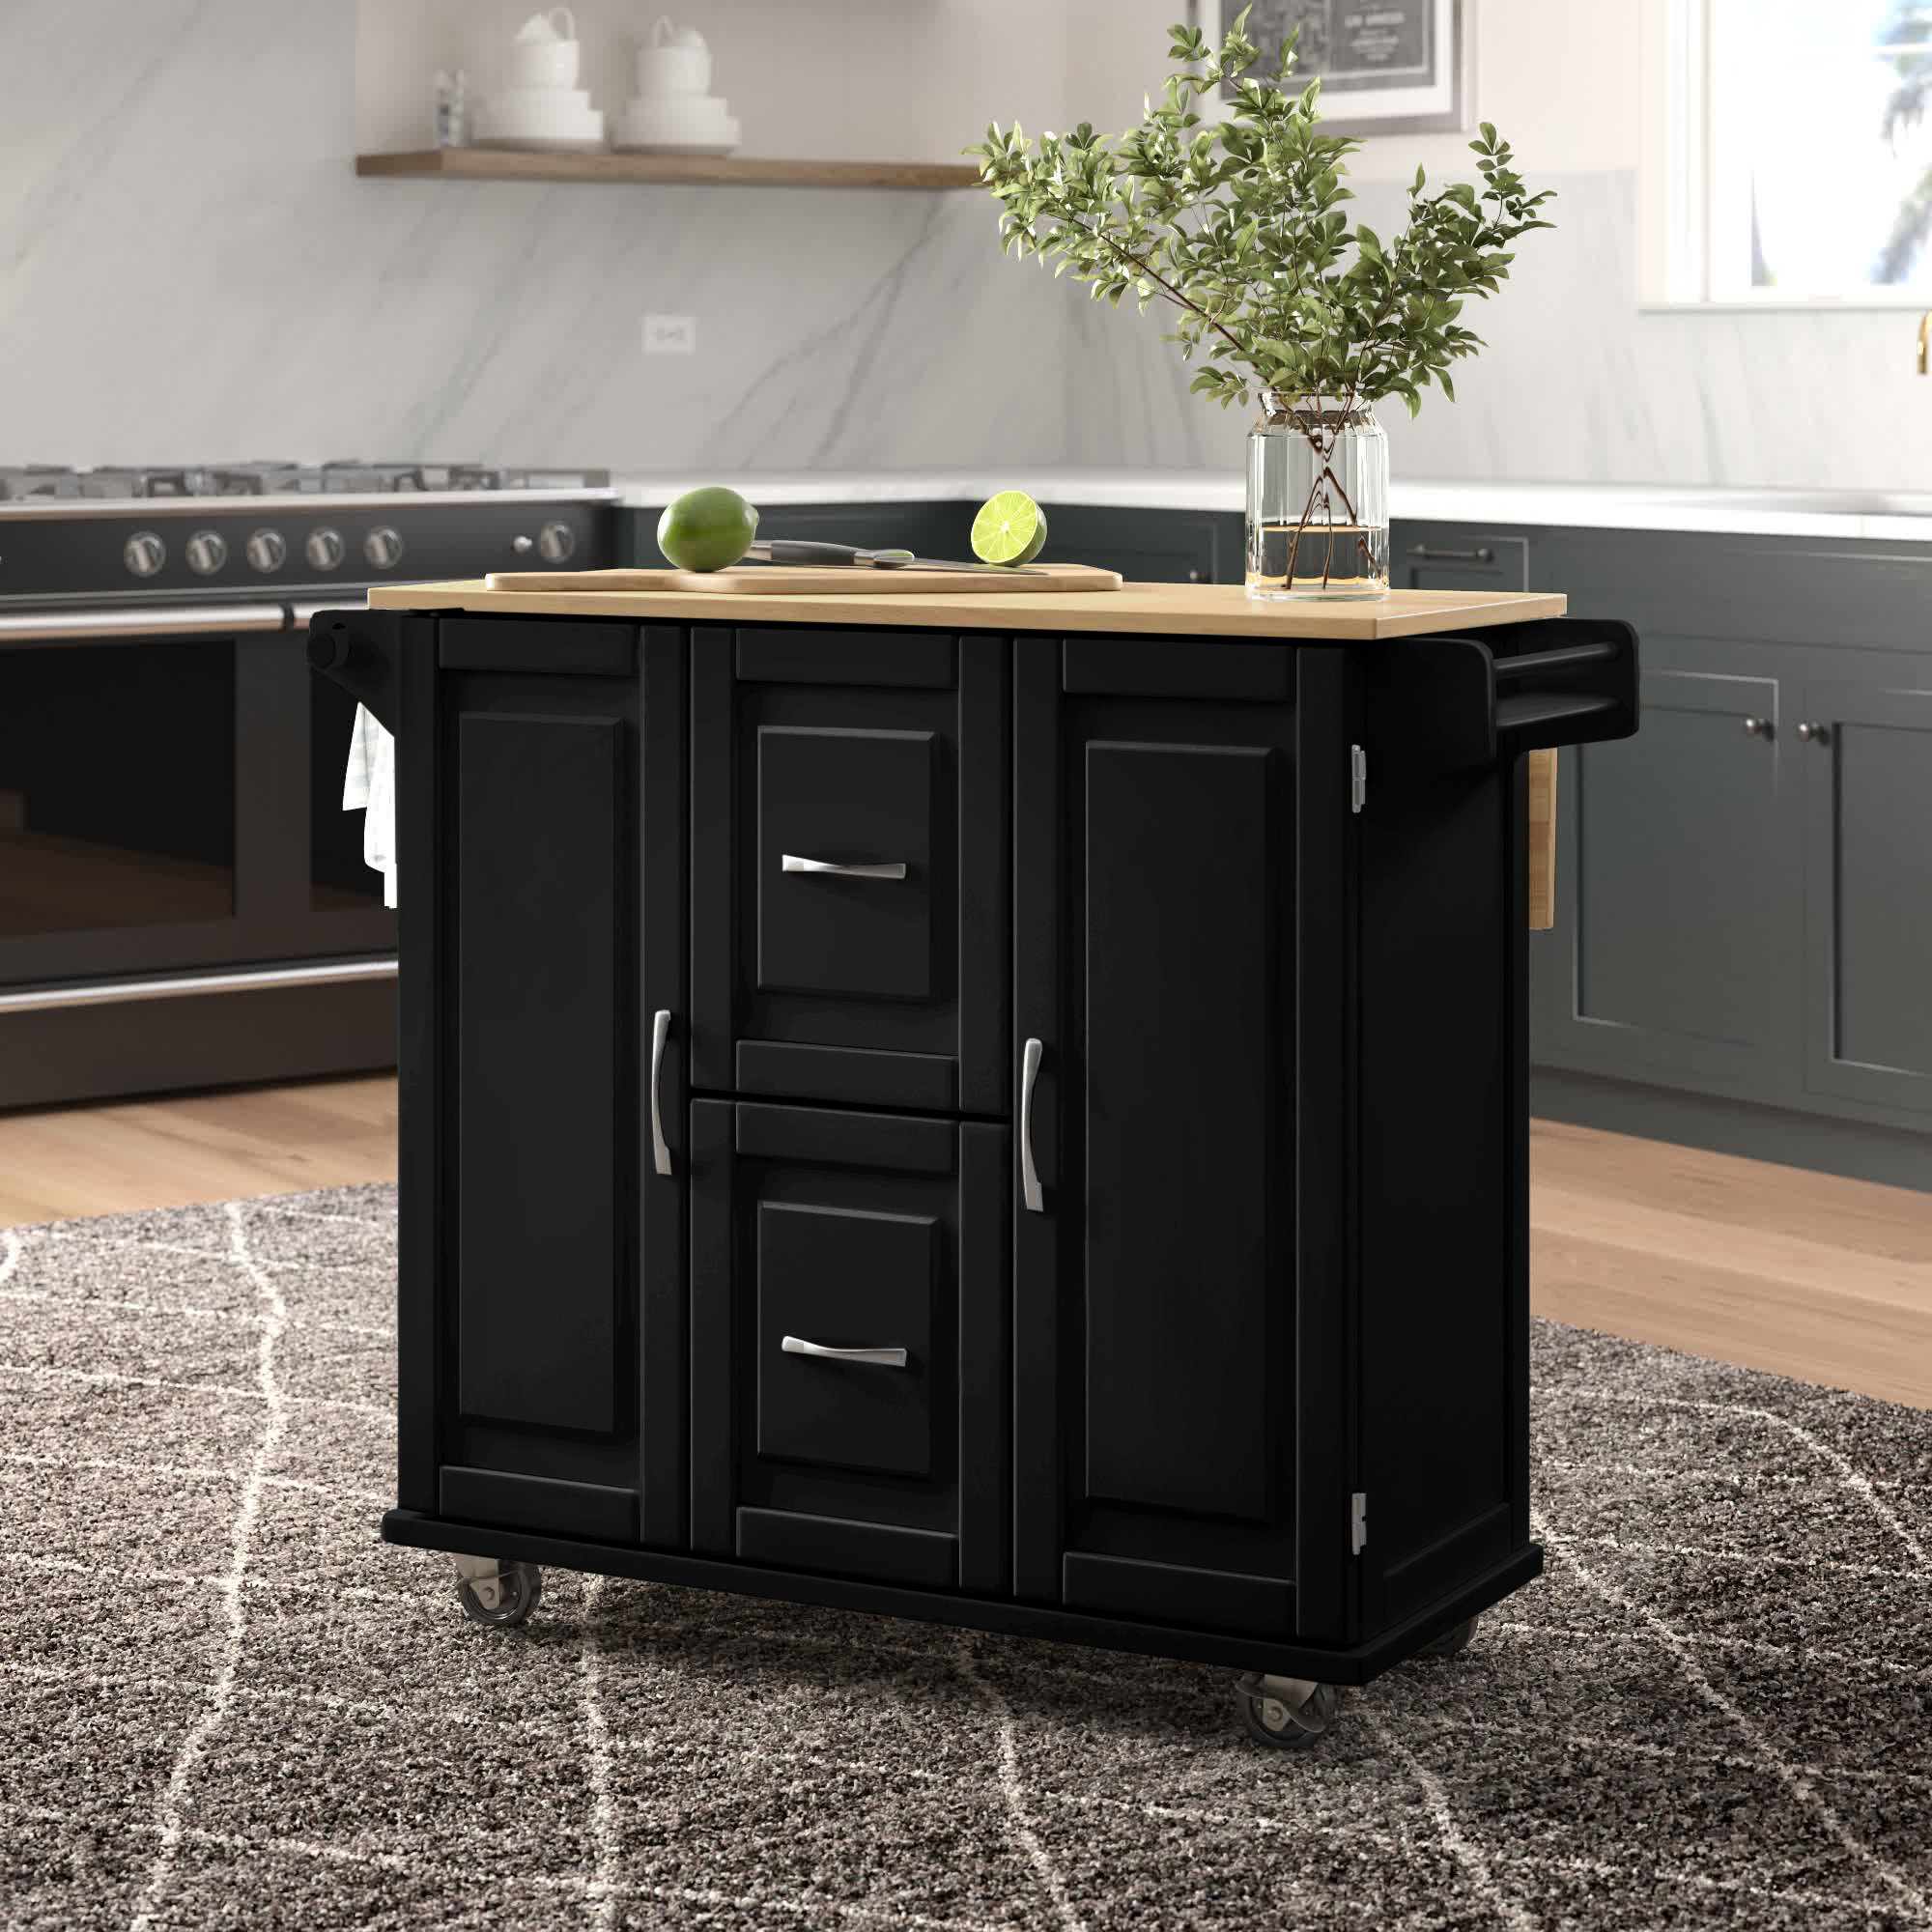 Up to 33% Off Madeline Mixer Lift Island Cabinet